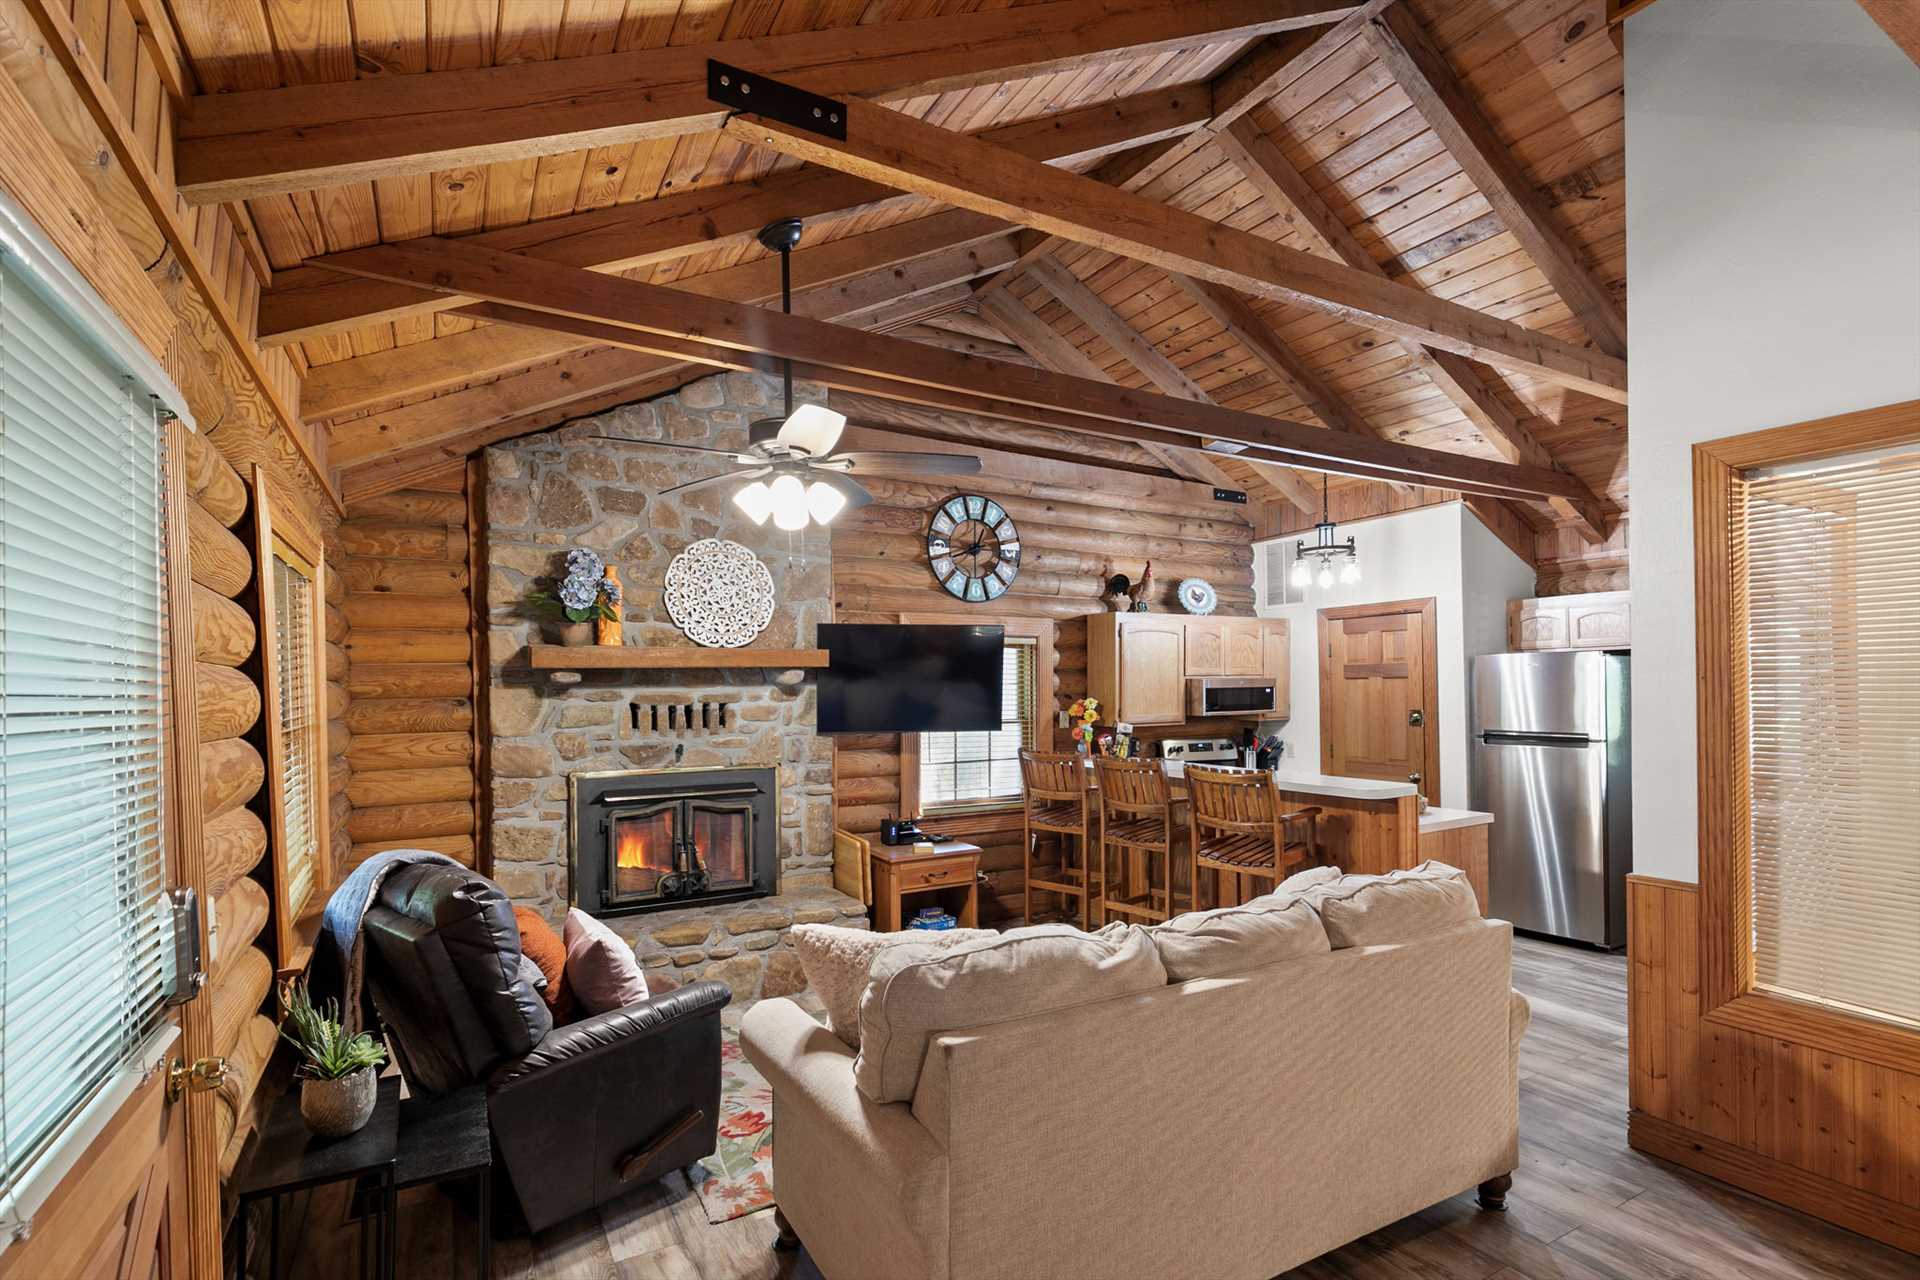 The cabin has a open concept studio layout.